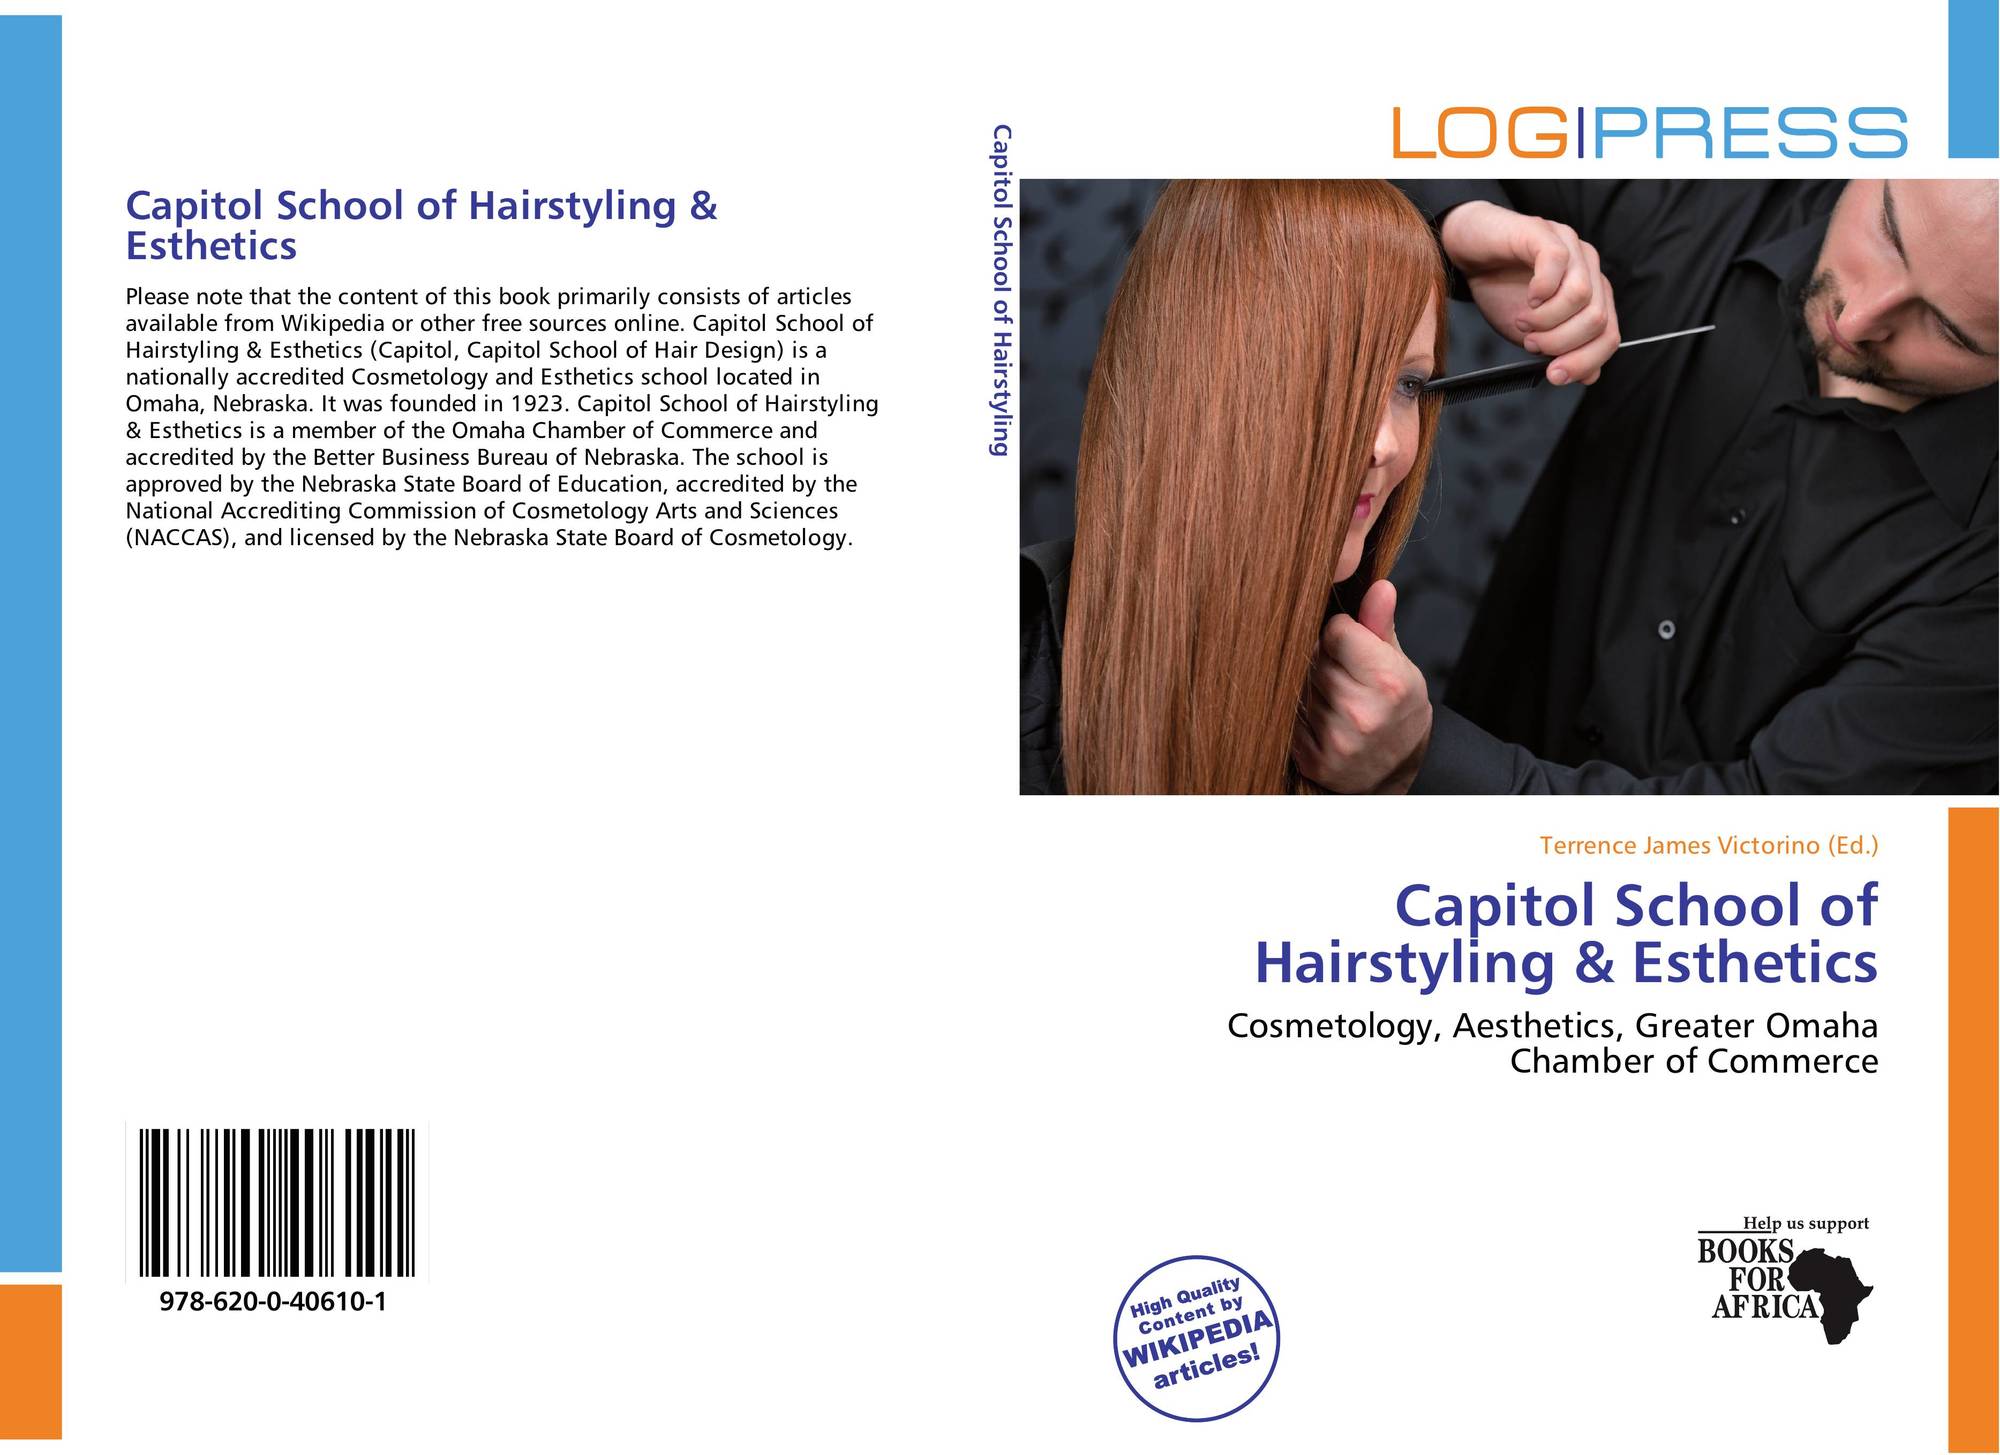 Capitol School of Hairstyling & Esthetics - wide 4